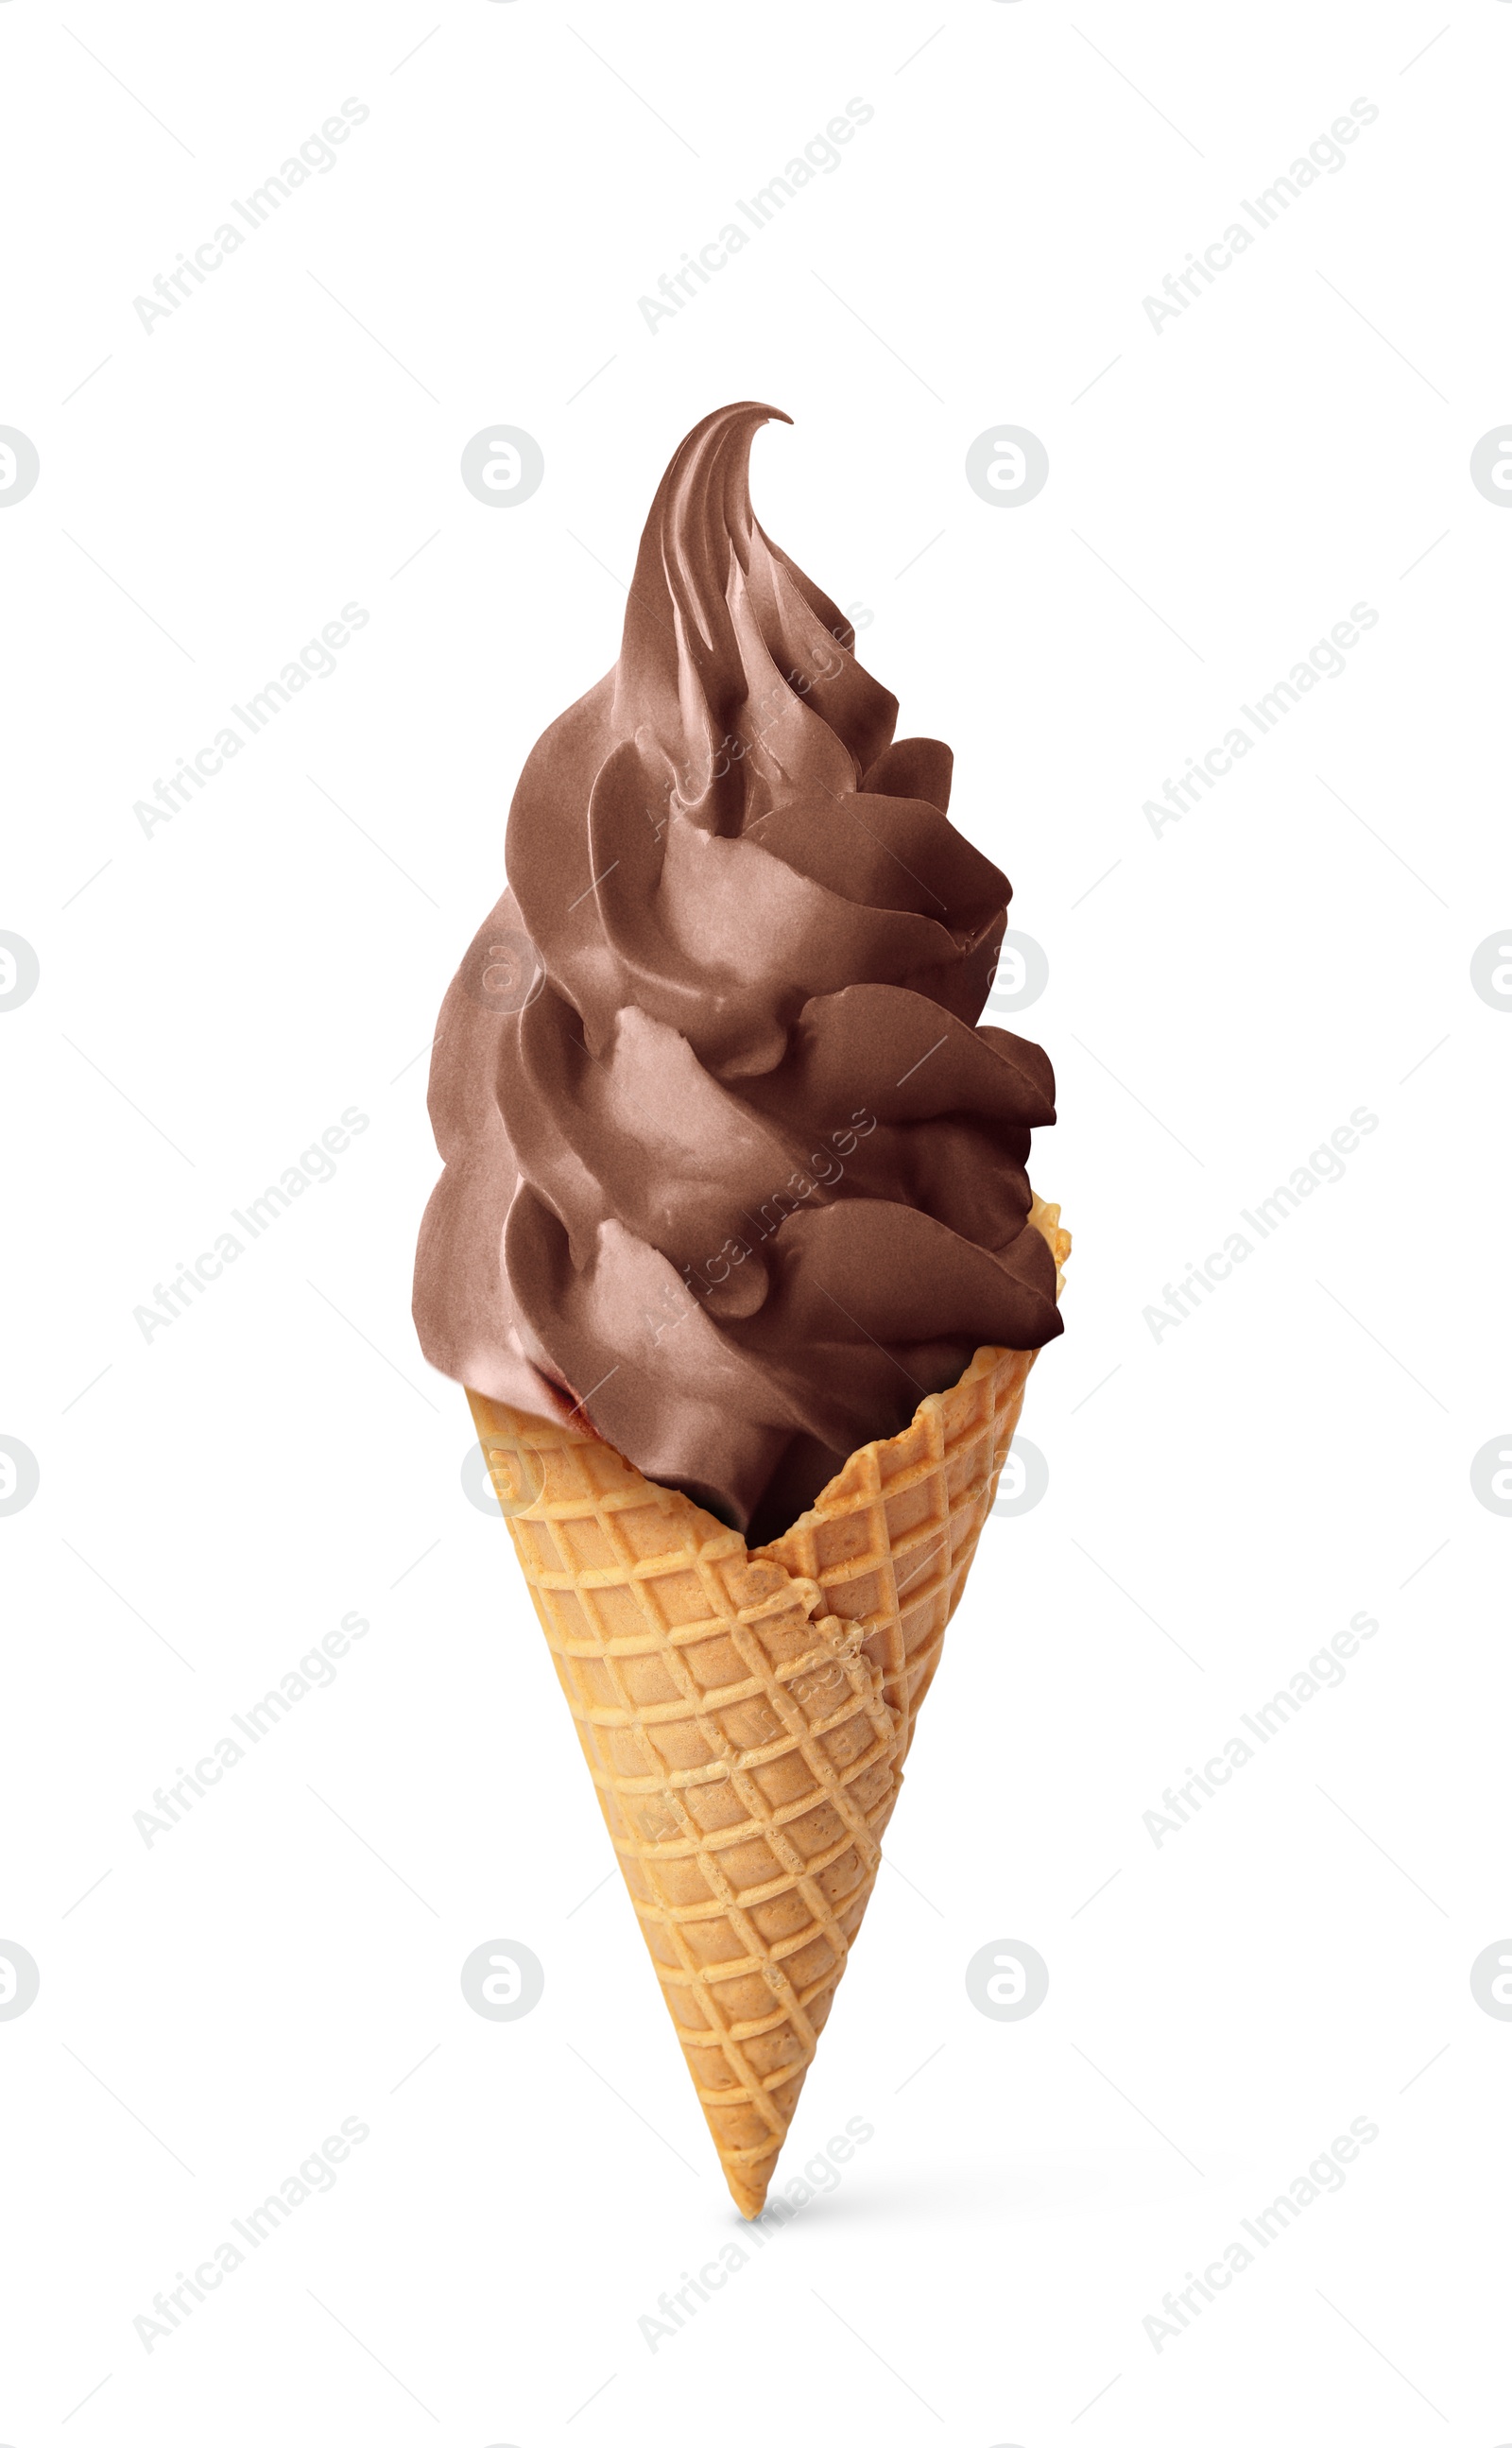 Image of Delicious soft serve chocolate ice cream in crispy cone isolated on white